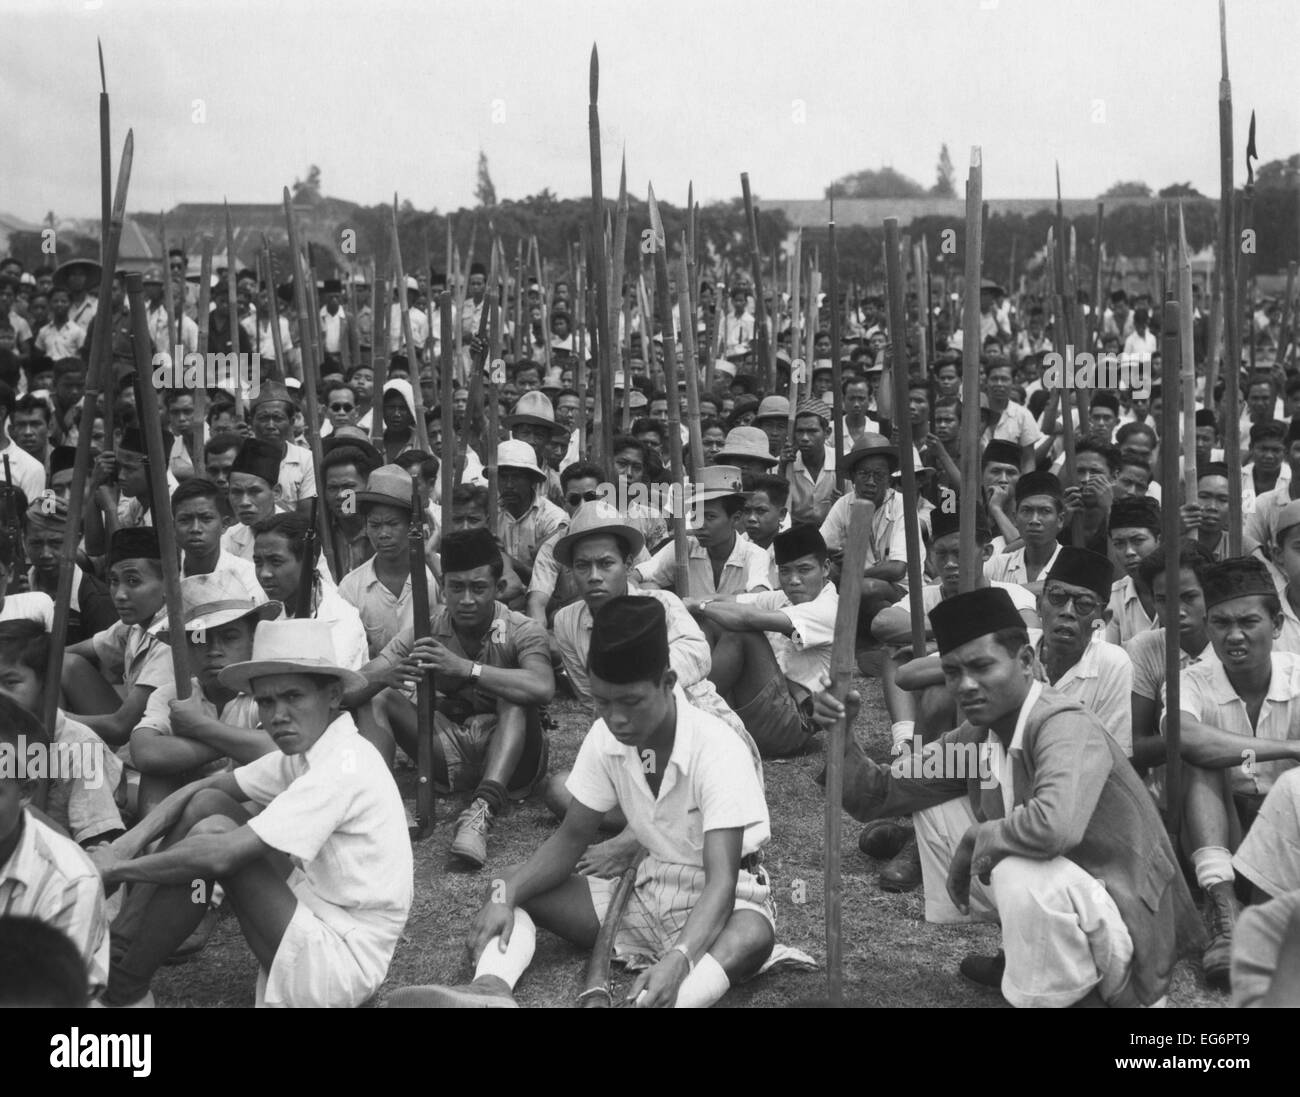 young-indonesian-men-seated-on-ground-holding-sharpened-bamboo-poles-EG6PT9.jpg